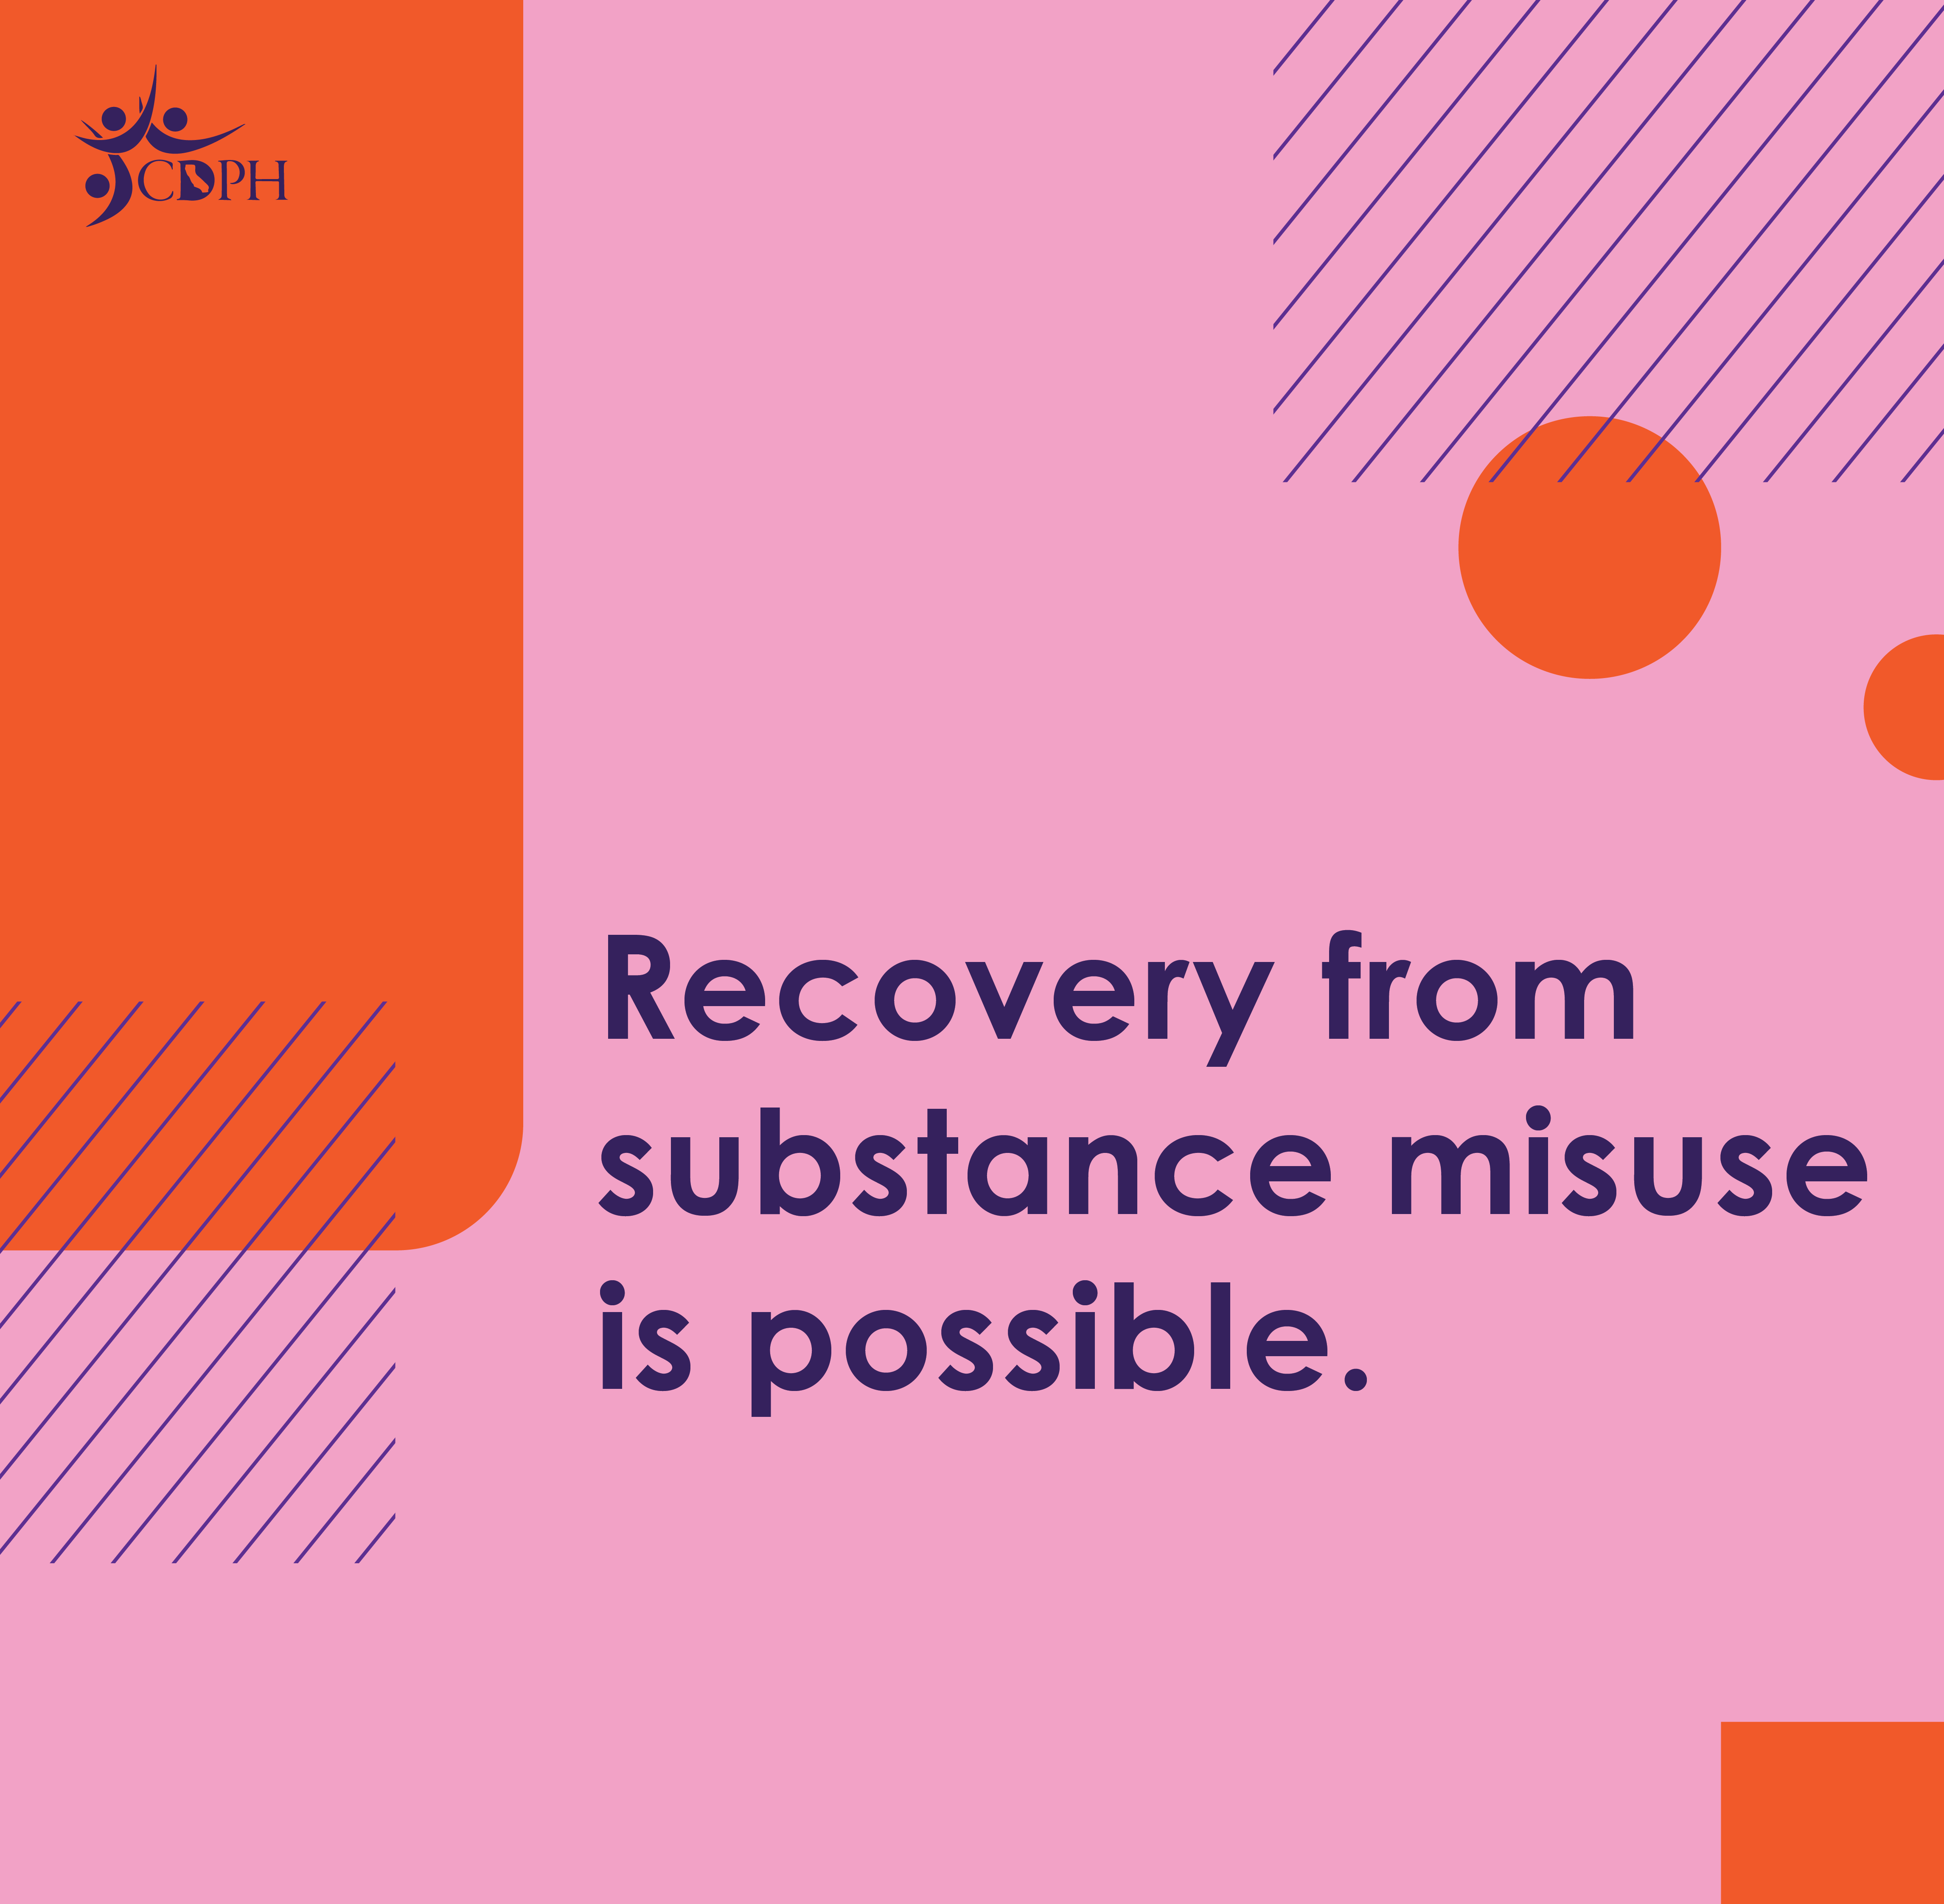 Rocovery from substance misuse is possible.